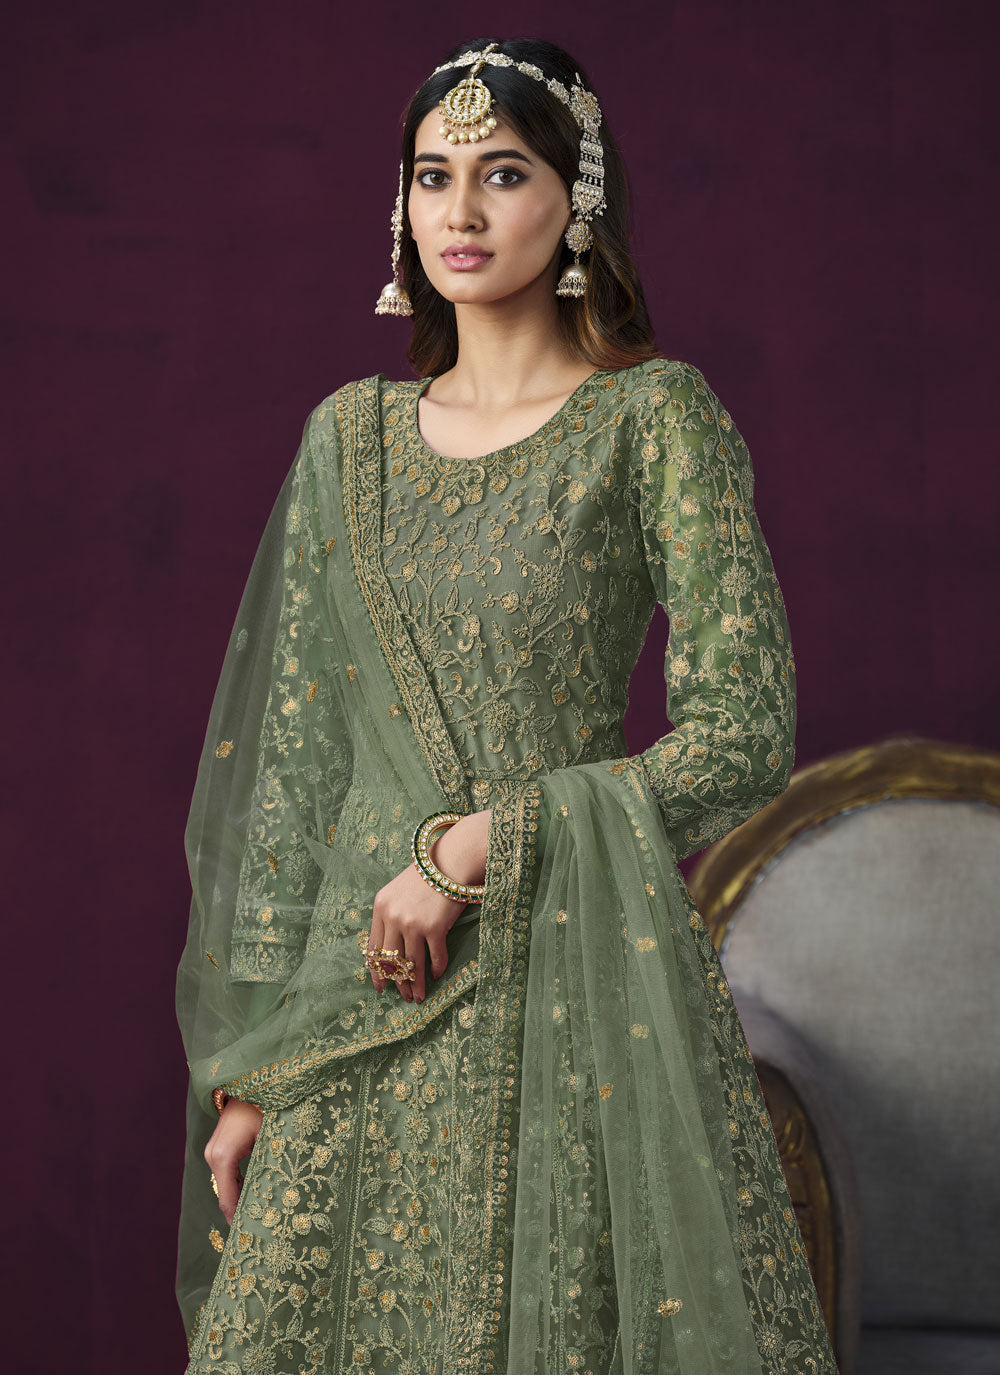 Embroidered Work Net Salwar Suit In Green